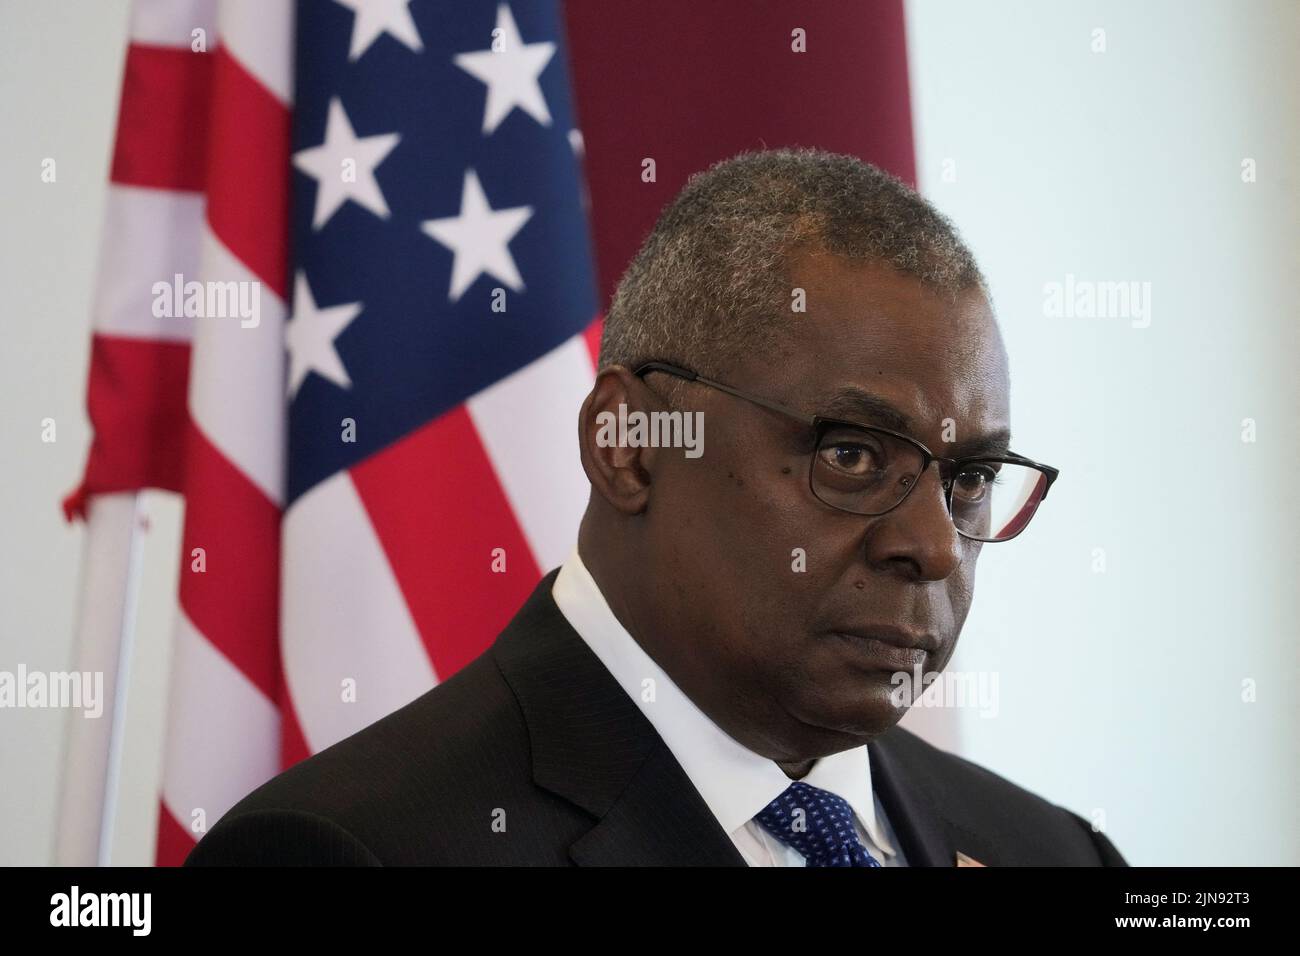 U.S. Defense Secretary Lloyd Austin attends a news conference with Latvian Defense Minister Artis Pabriks in Riga, Latvia August 10, 2022. REUTERS/Ints Kalnins Stock Photo